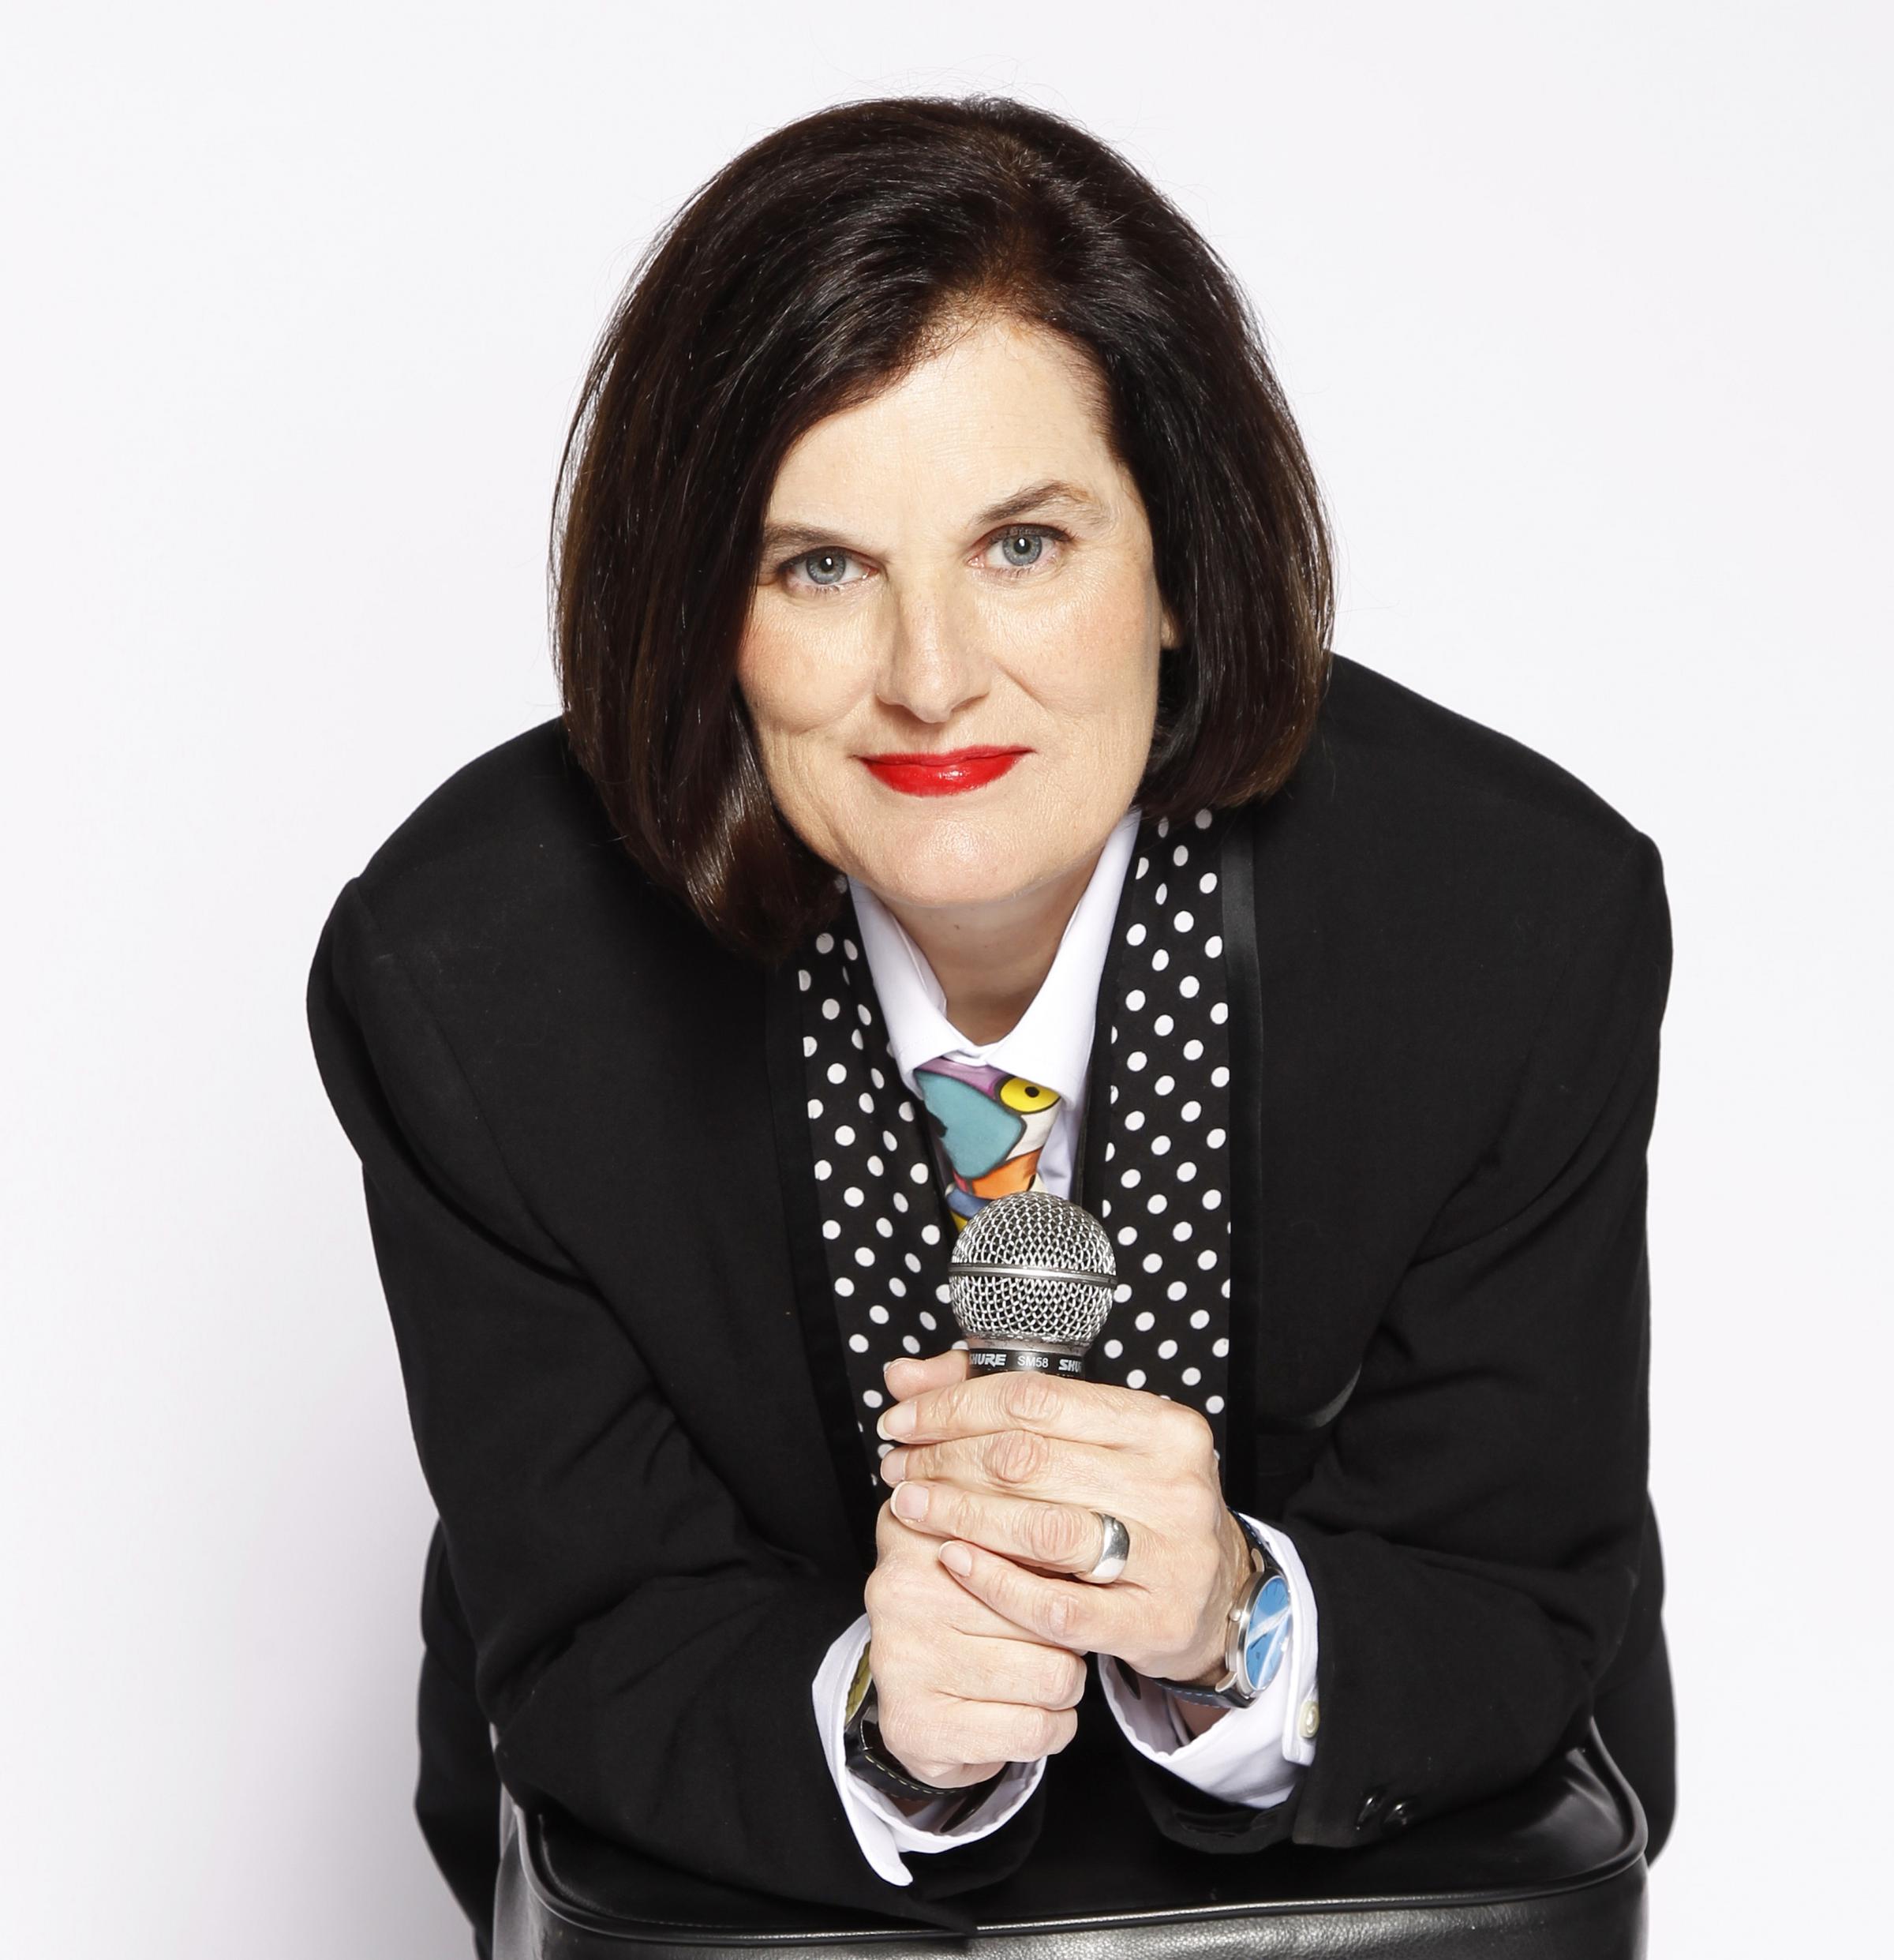 Paula Poundstone's Standup Act About "Laughing, Not Voting" WMUK